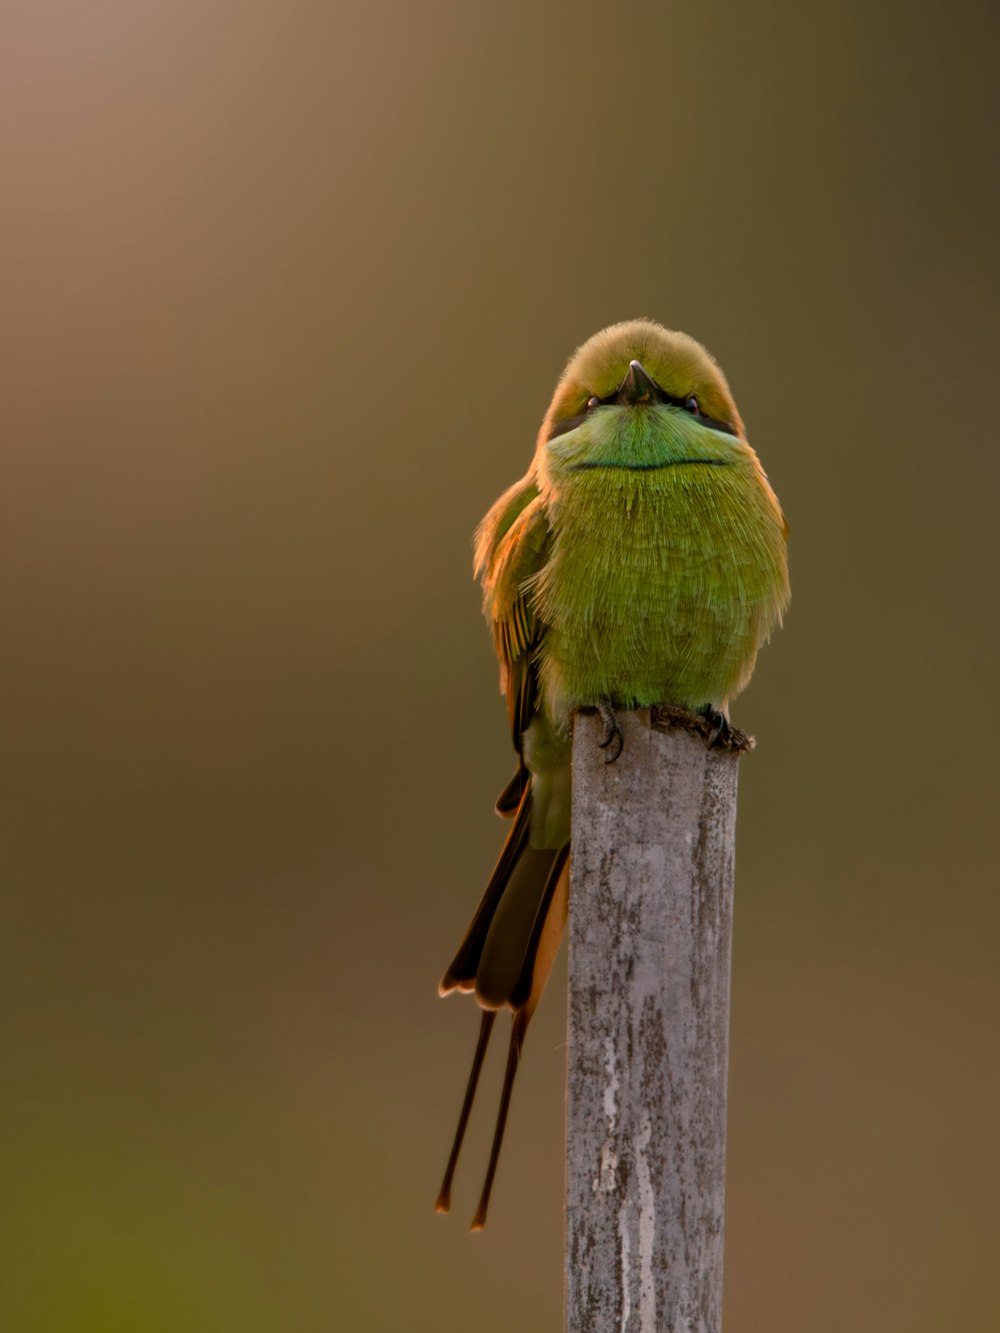 a small green bird sitting on top of a wooden pole